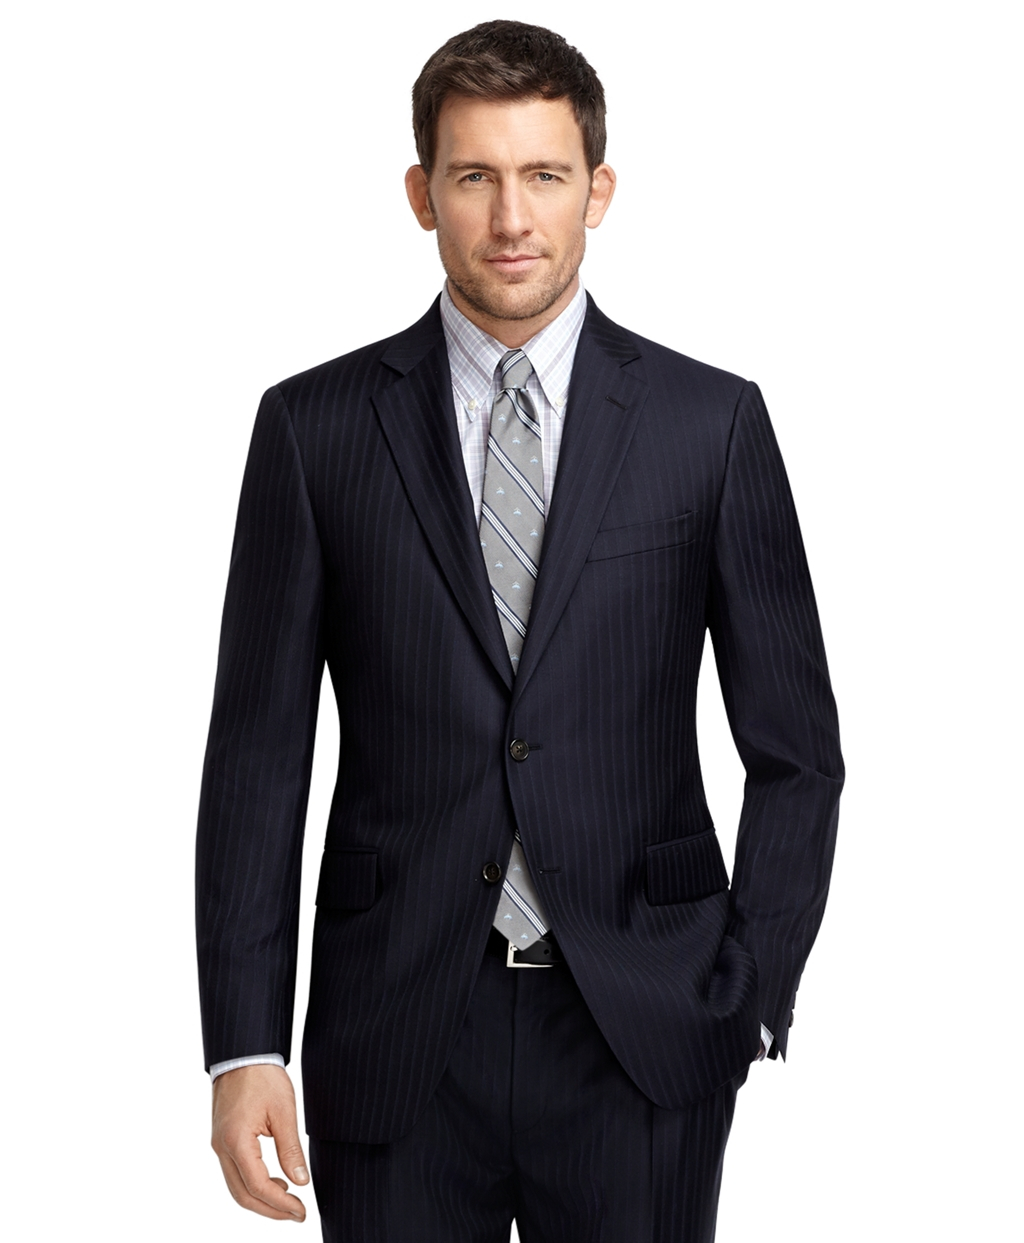 Lyst - Brooks Brothers Madison Fit Navy With Light Blue Pinstripe 1818